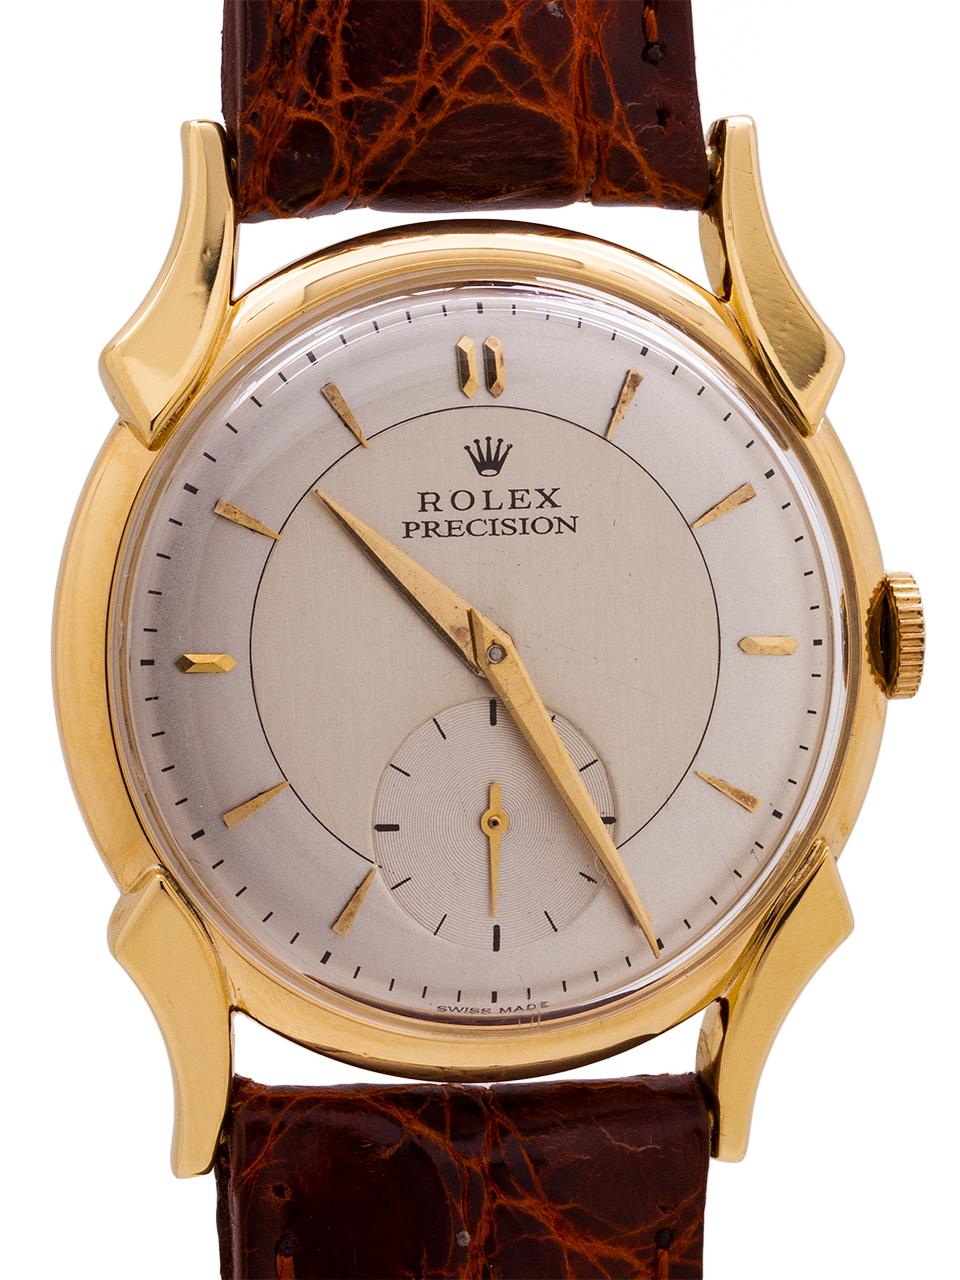 
Rolex Precision 18K YG man’s manual wind dress model ref. 4477 circa 1955. A very attractive medium sized dress model featuring a 33mm snap back case highly stylized and curved lugs, with a smooth, sloped gold bezel, and low dome acrylic crystal.